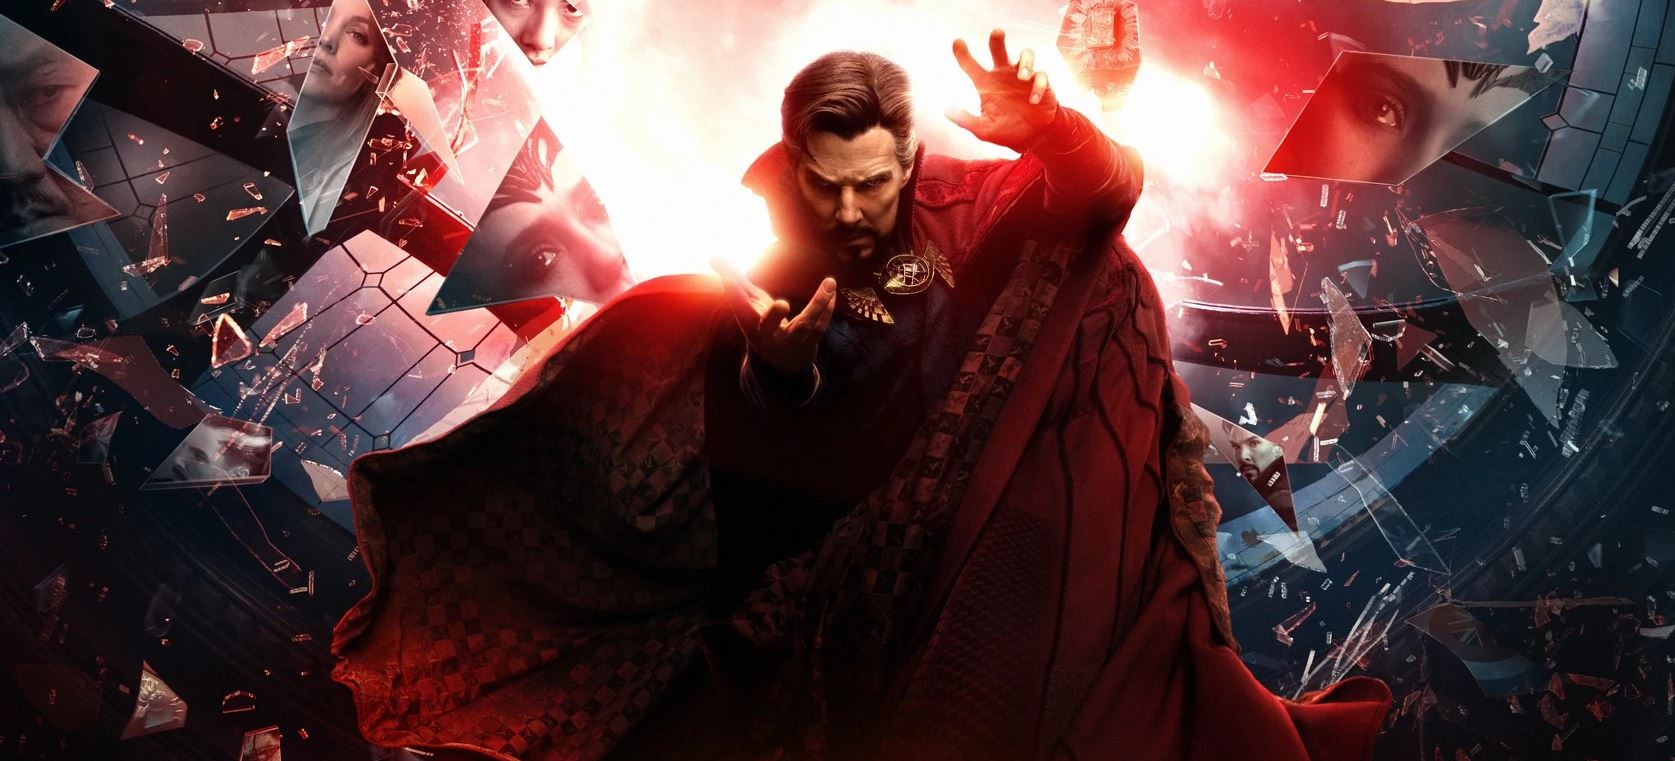 Get Lost In The Latest Look At ‘Doctor Strange in the Multiverse of Madness’